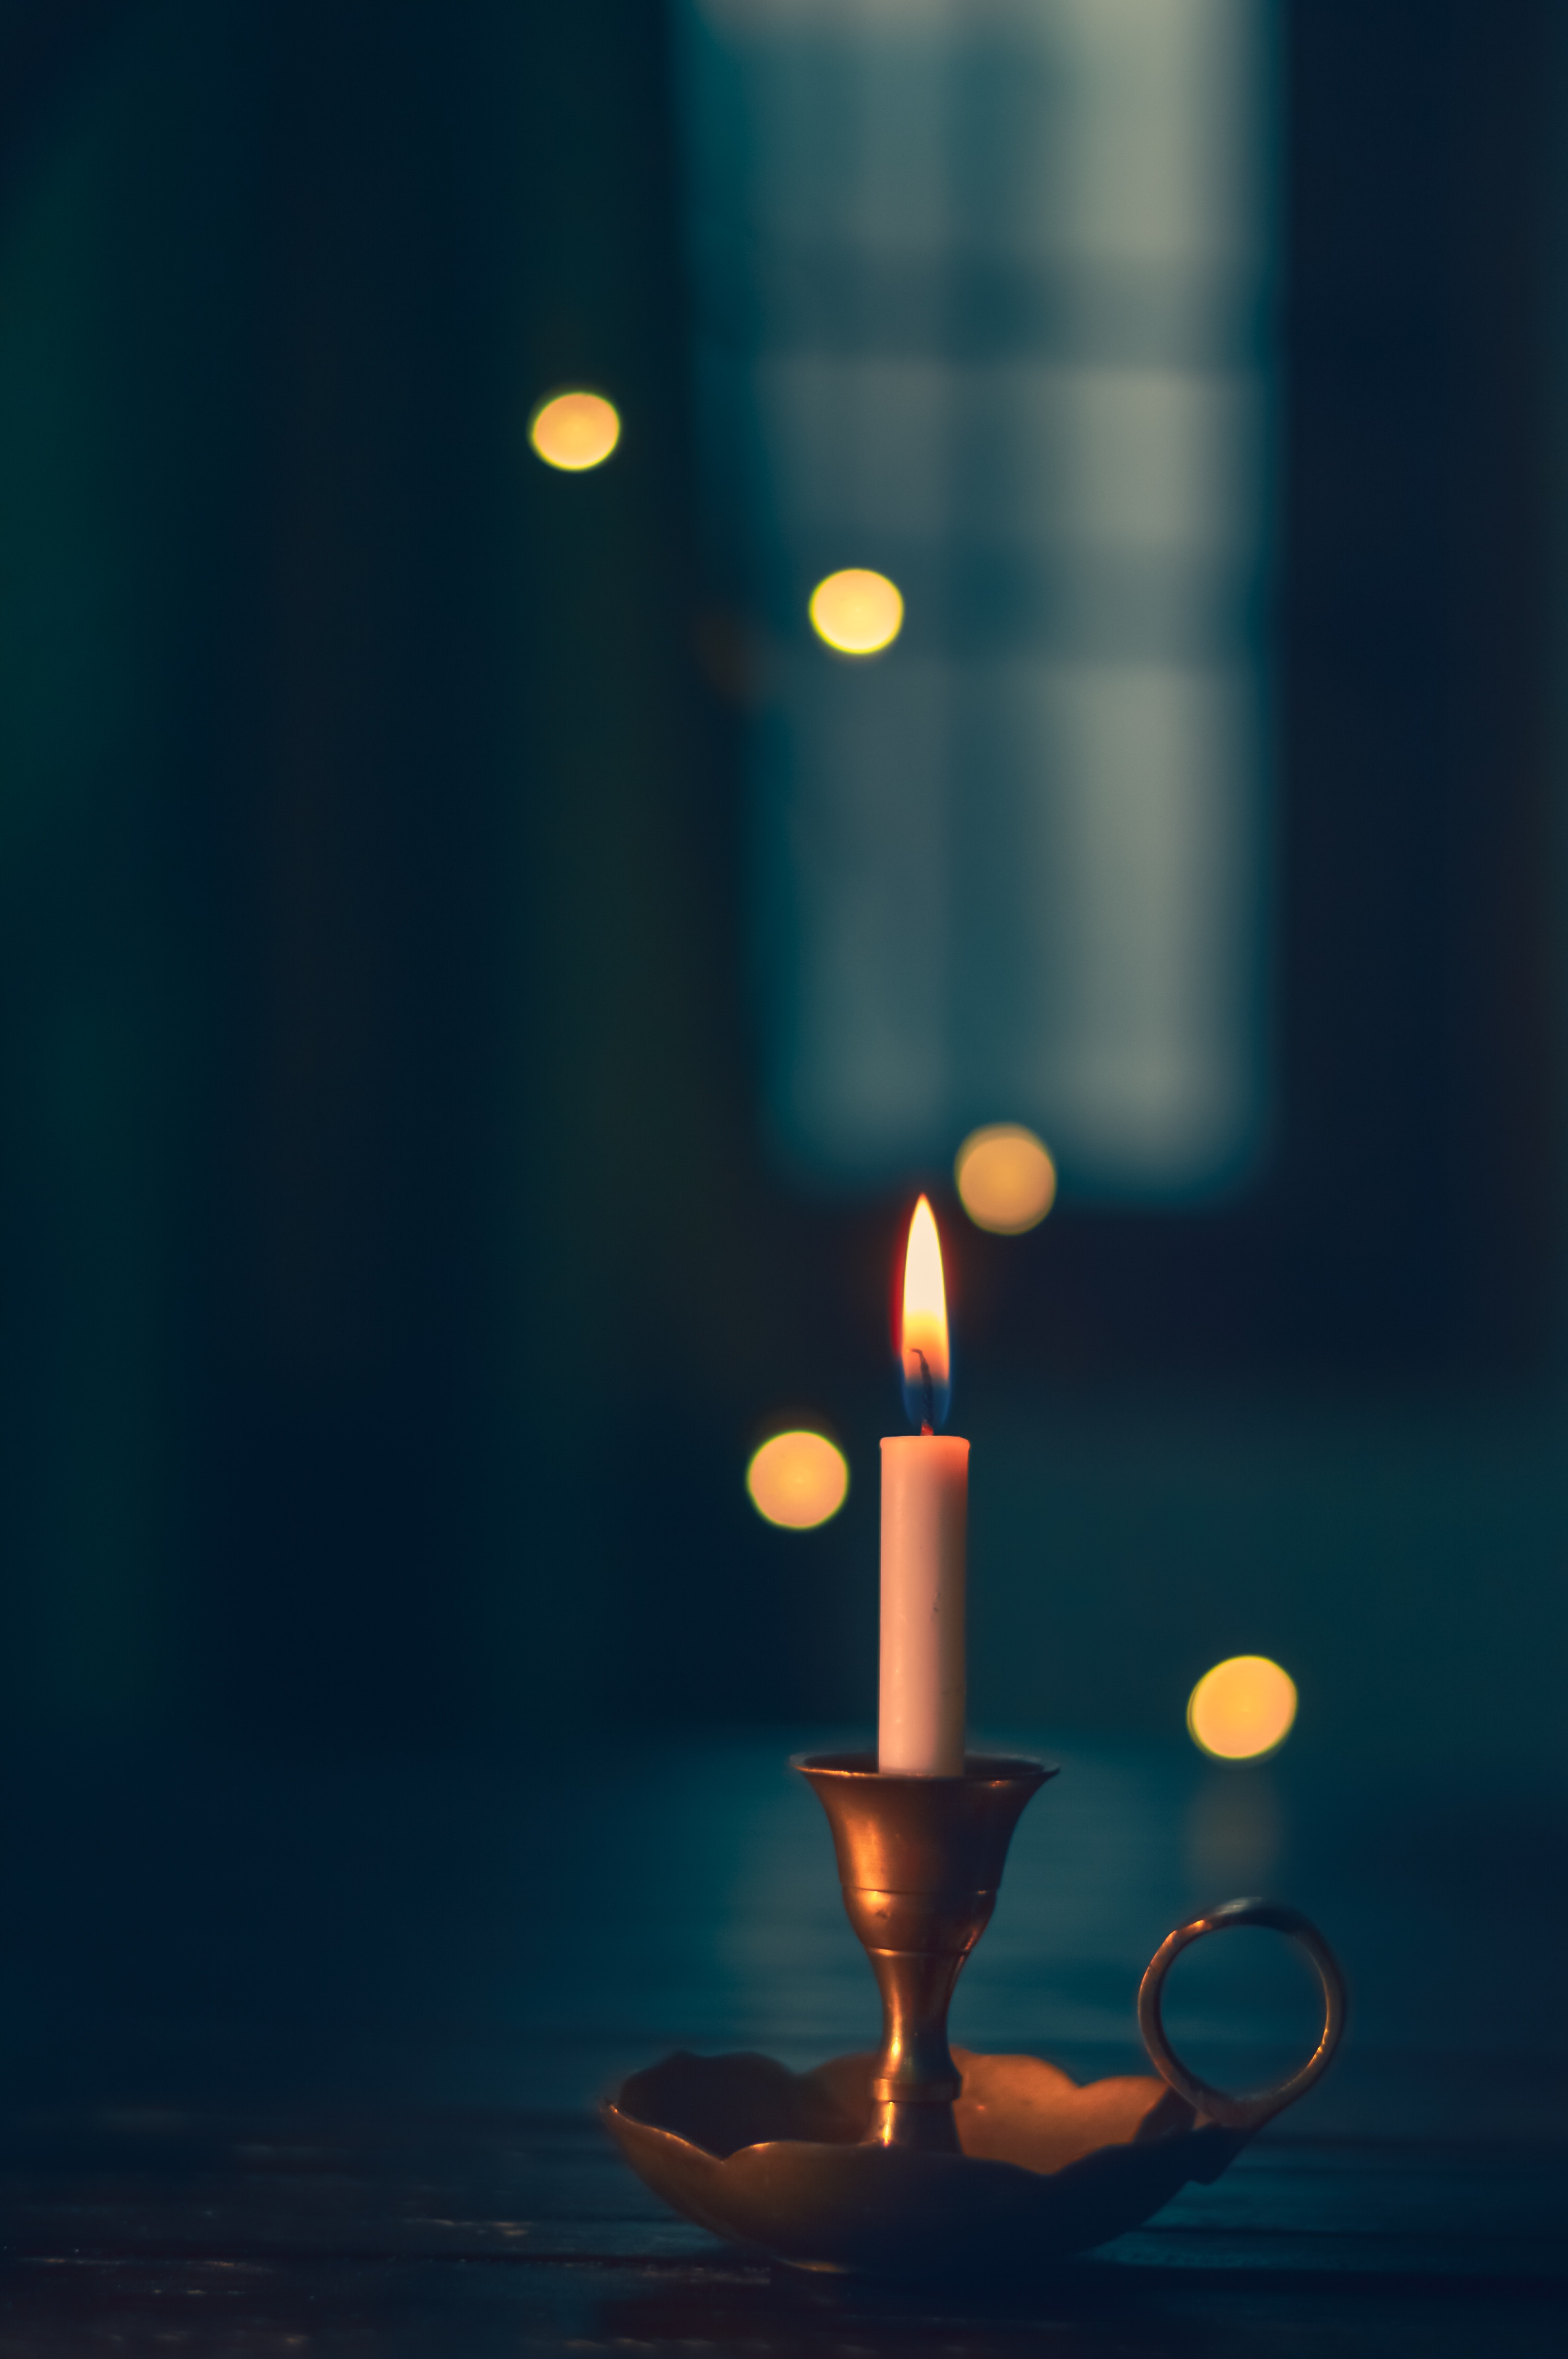 blur, miscellanea, candle, fire, wax, miscellaneous, smooth, wick, candlestick wallpapers for tablet